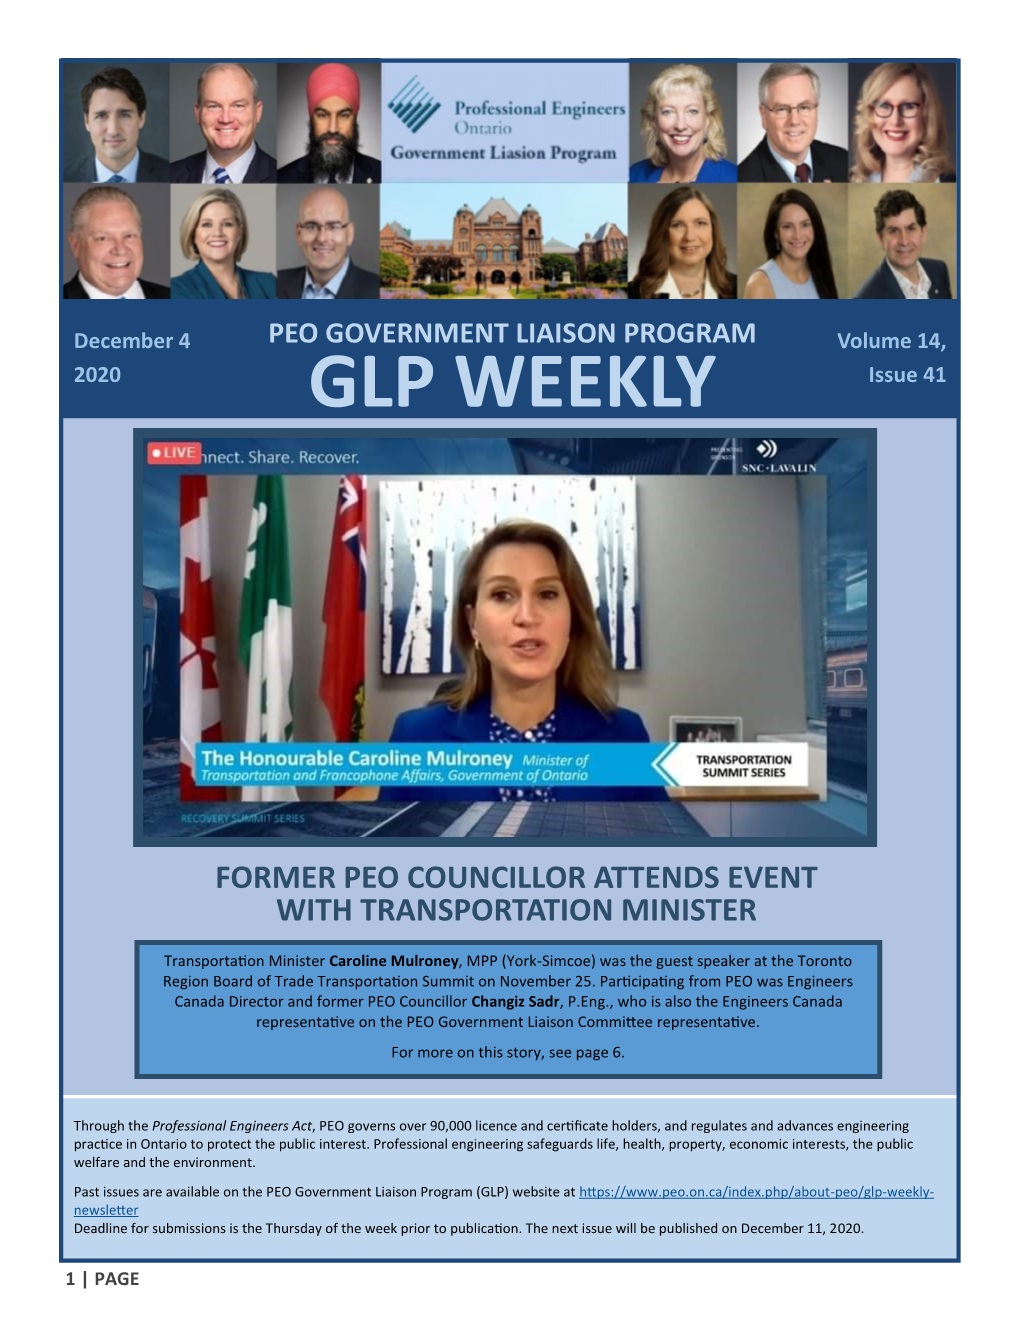 PEO GOVERNMENT LIAISON PROGRAM Volume 14, 2020 GLP WEEKLY Issue 41